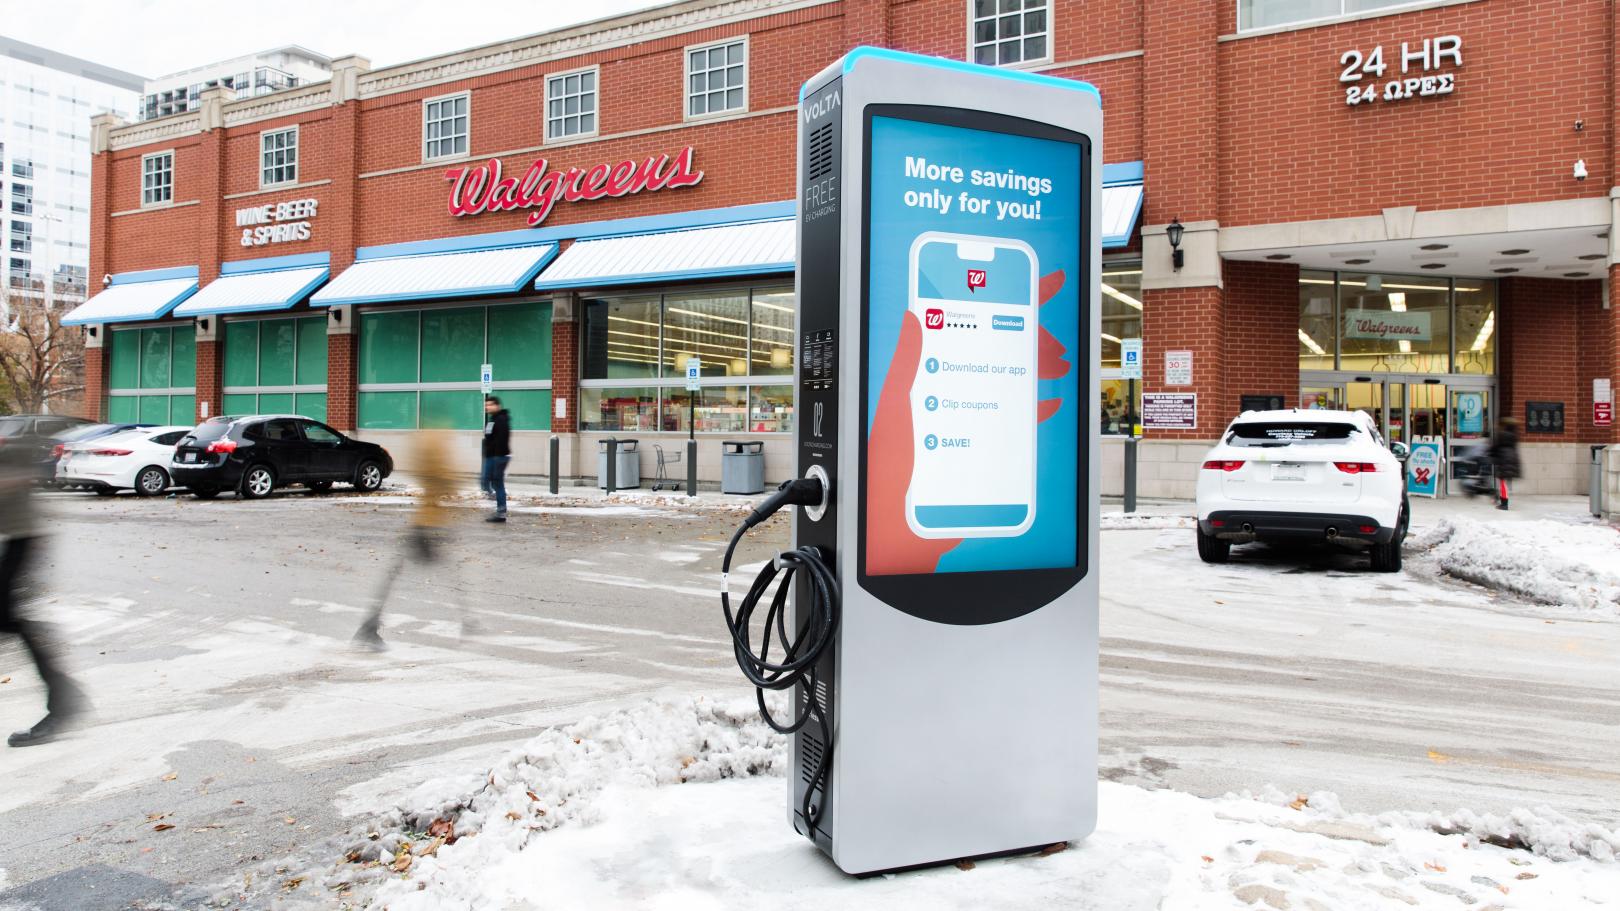 Electric vehicle charging point outside of a Walgreens drugstore.